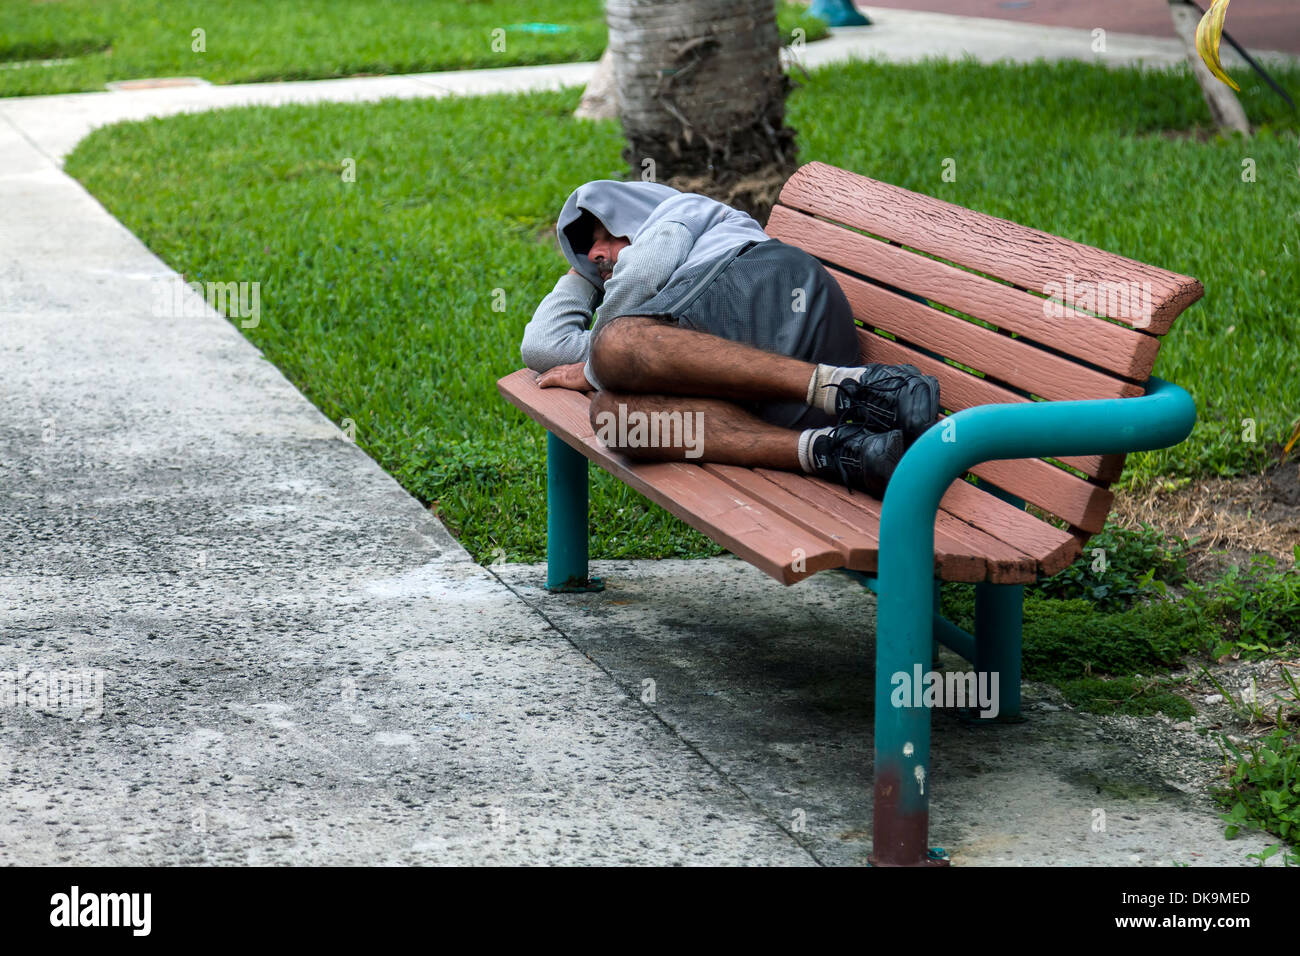 A Homeless Man Sleeping On A Park Bench In Downtown Fort Lauderdale